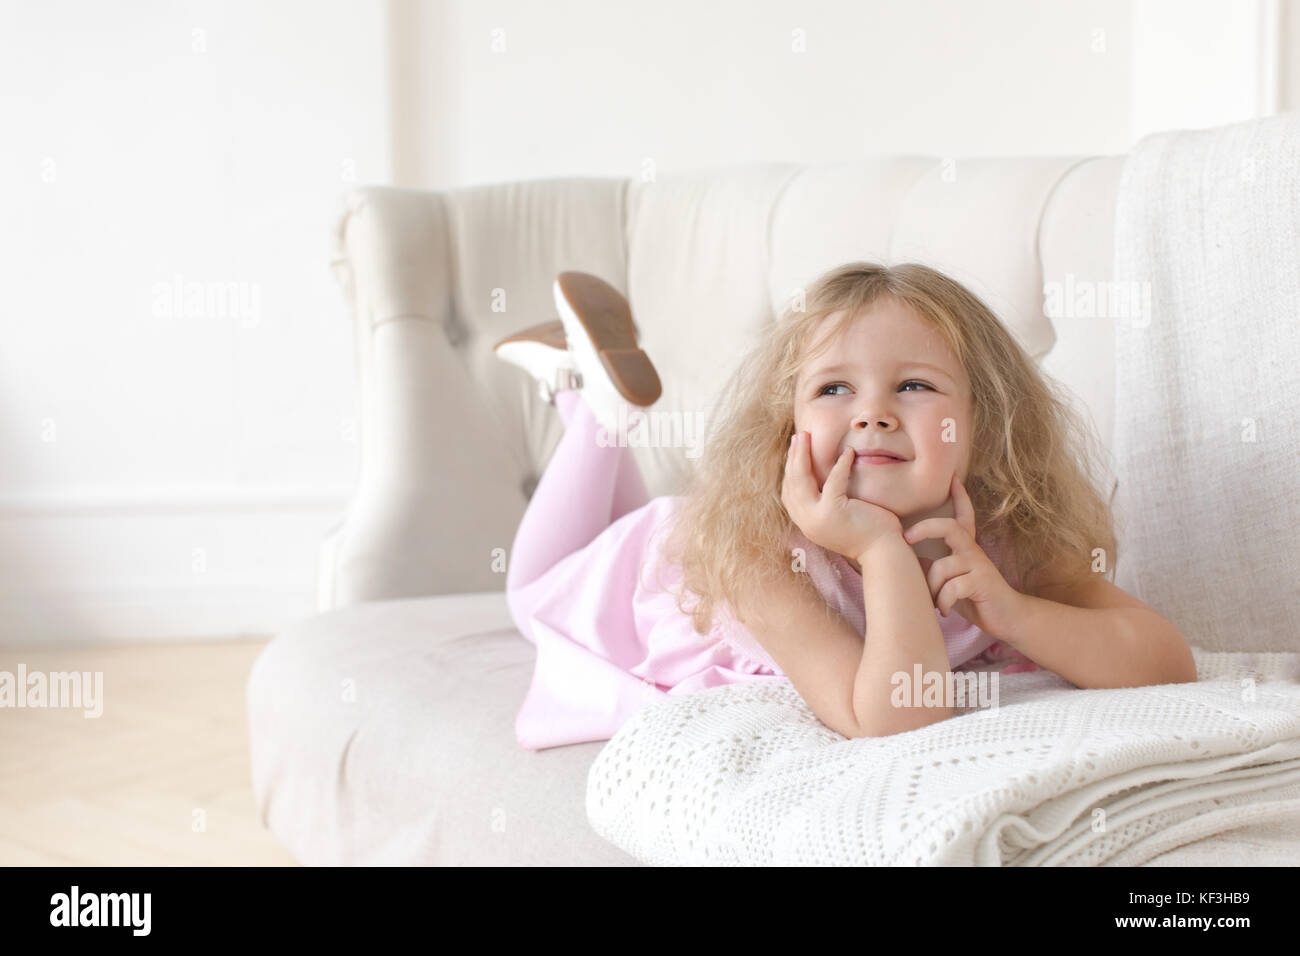 Charming little girl posing on sofa on a white background Stock Photo